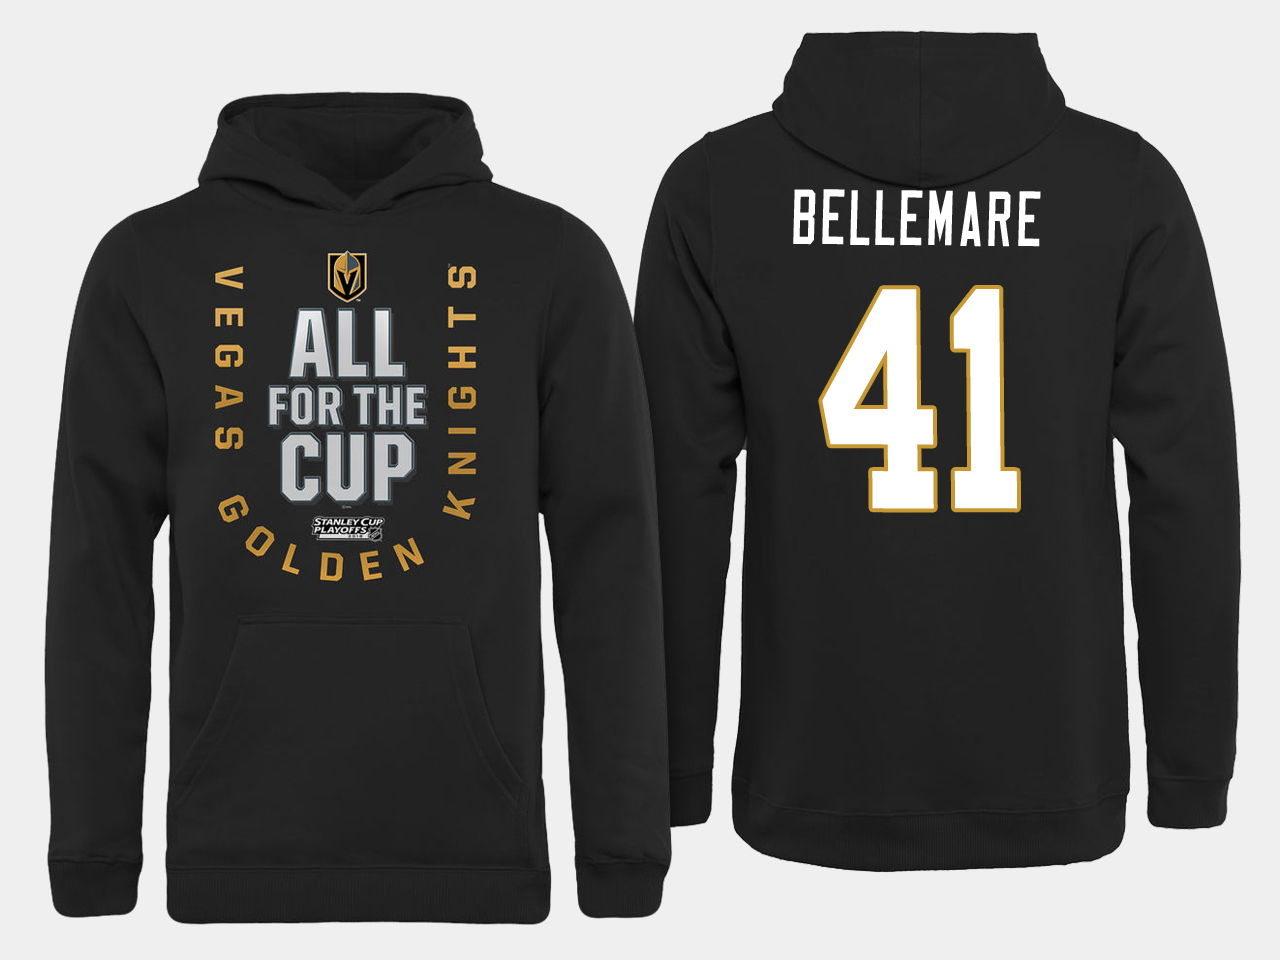 Men NHL Vegas Golden Knights #41 Bellemare All for the Cup hoodie